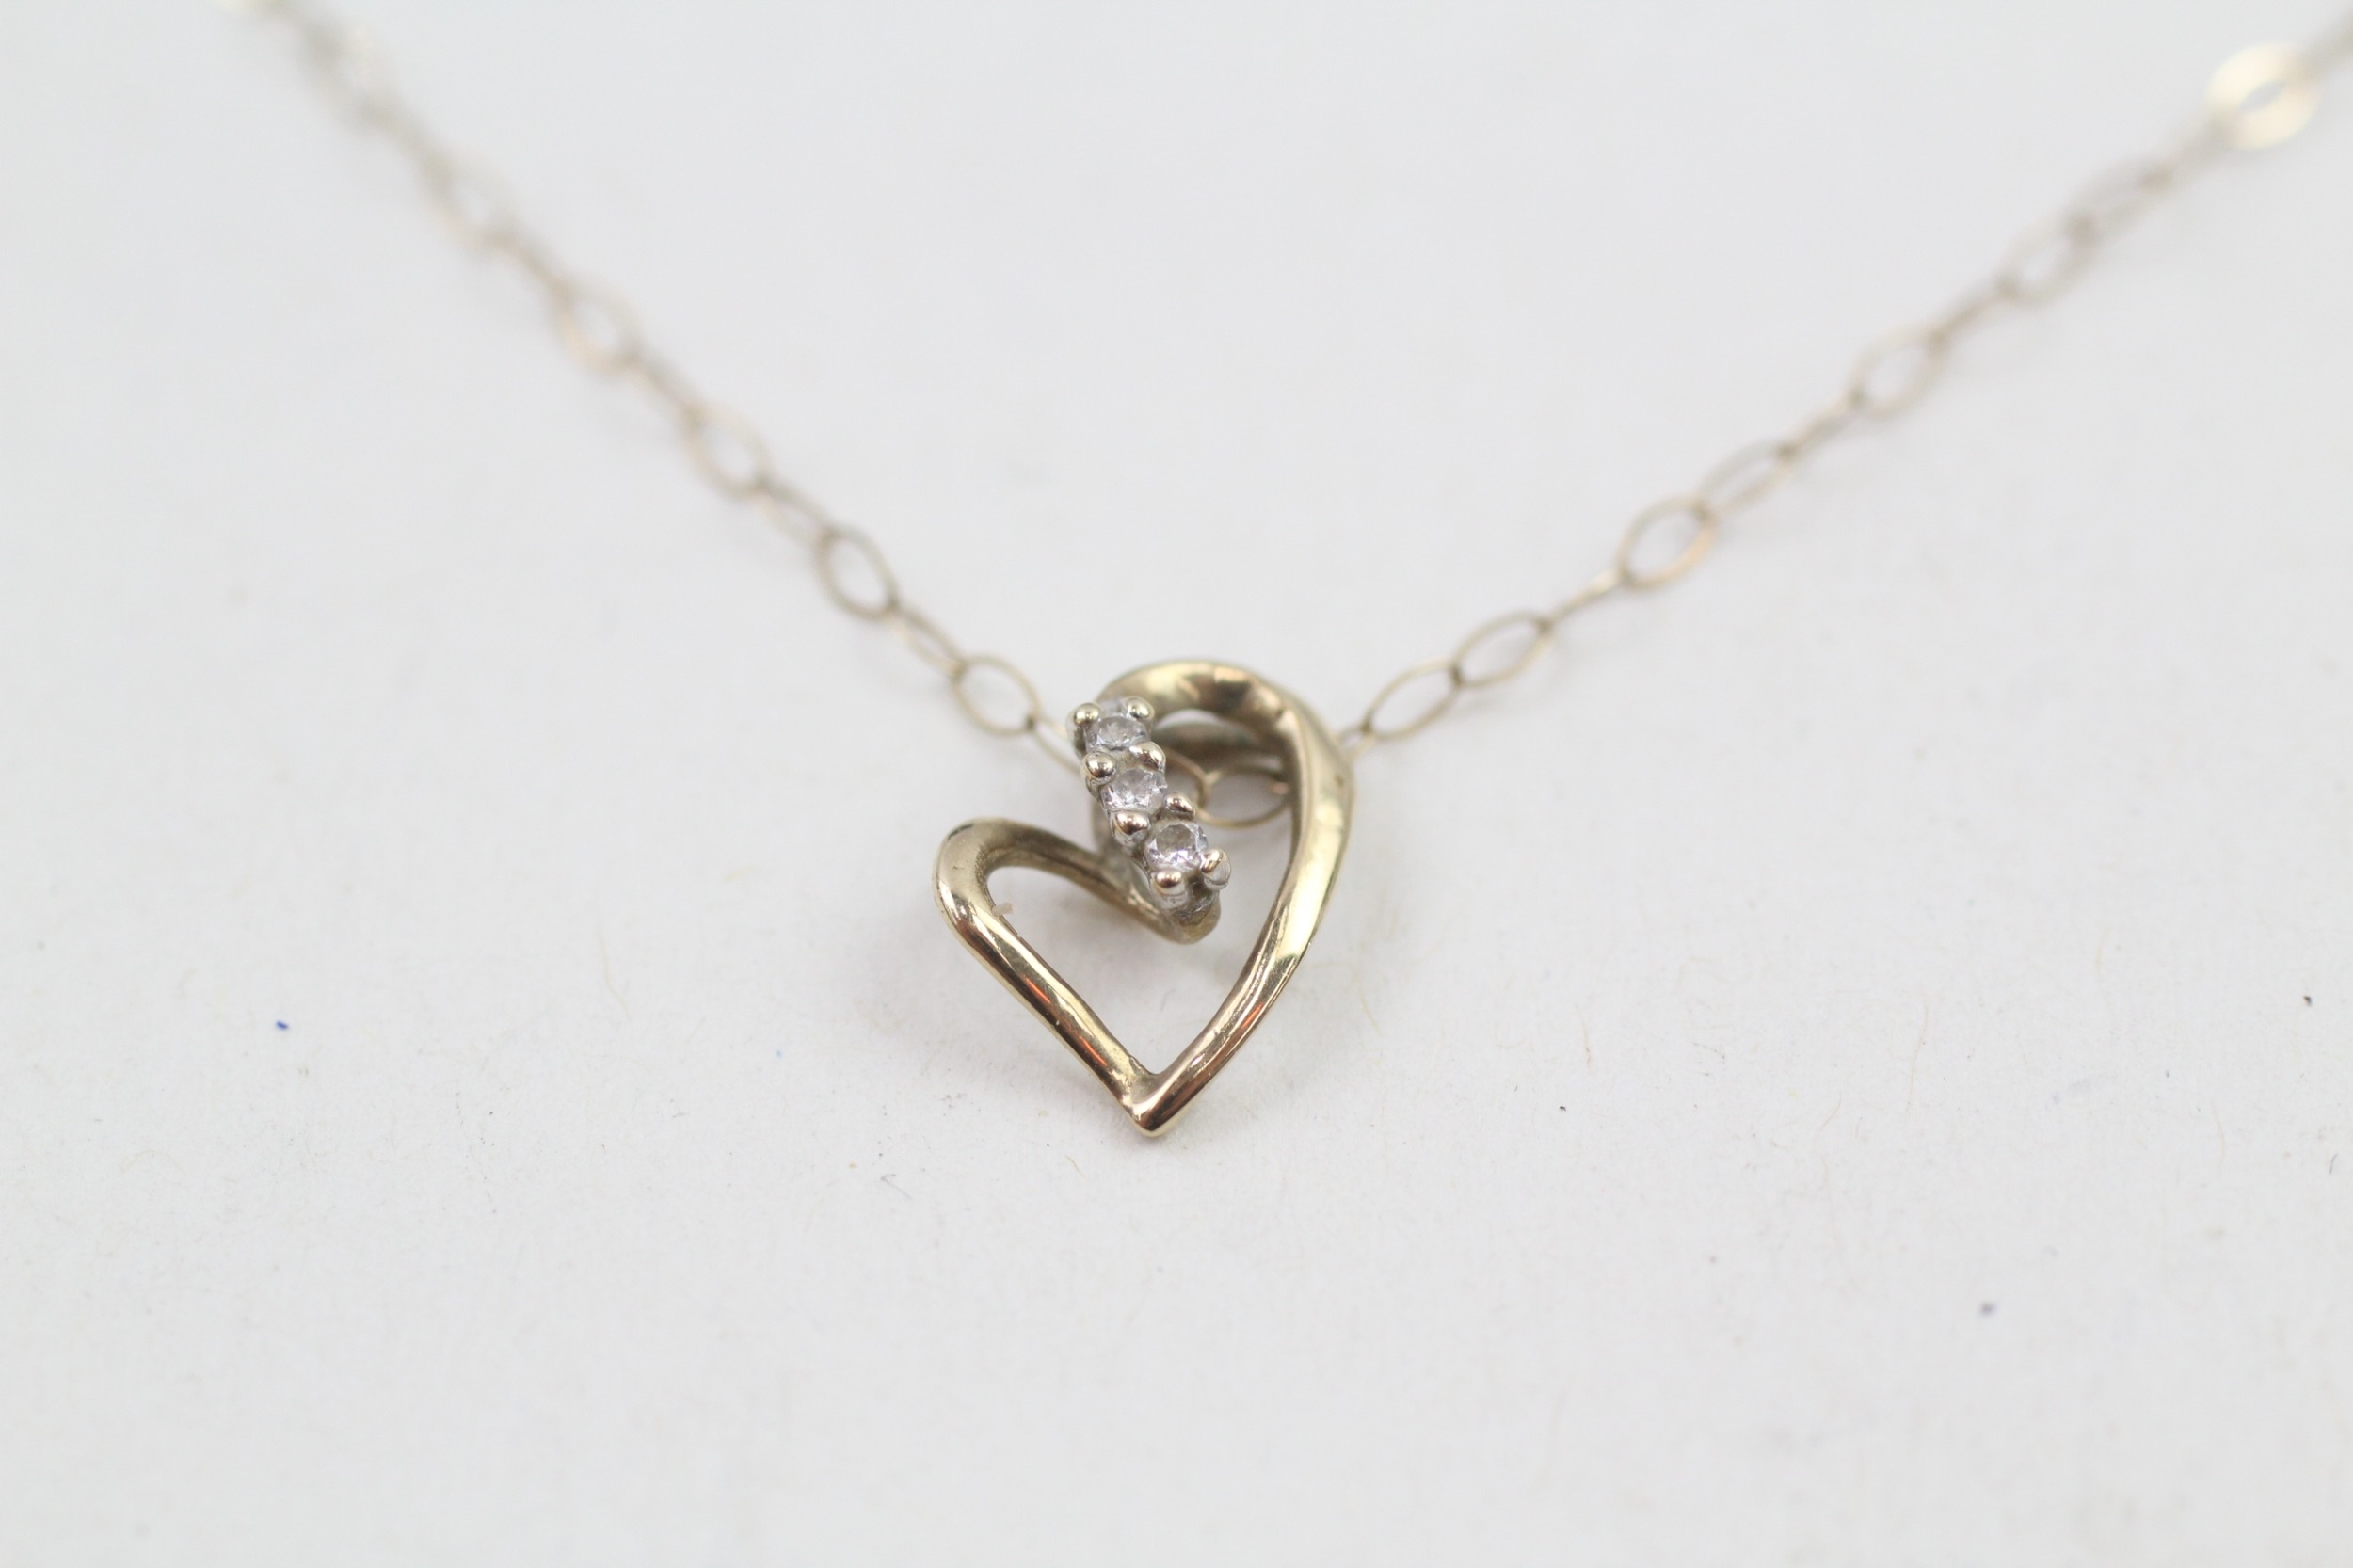 9ct gold cubic zirconia heart shaped pendant necklace (0.6g)